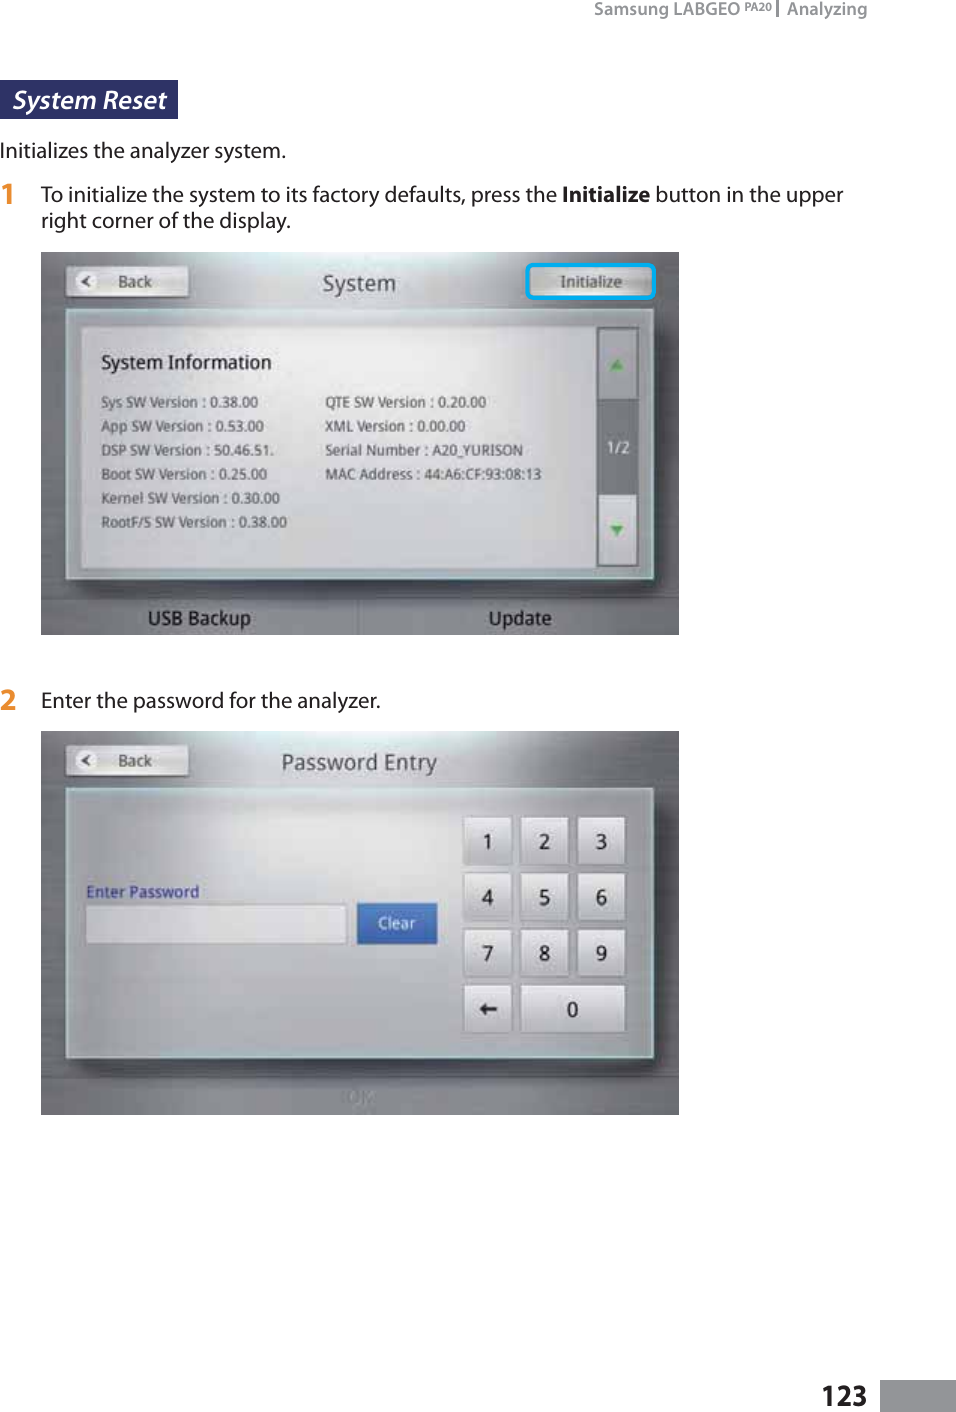 123Samsung LABGEO PA20   AnalyzingSystem Reset Initializes the analyzer system.1  To initialize the system to its factory defaults, press the Initialize button in the upper right corner of the display.2  Enter the password for the analyzer.